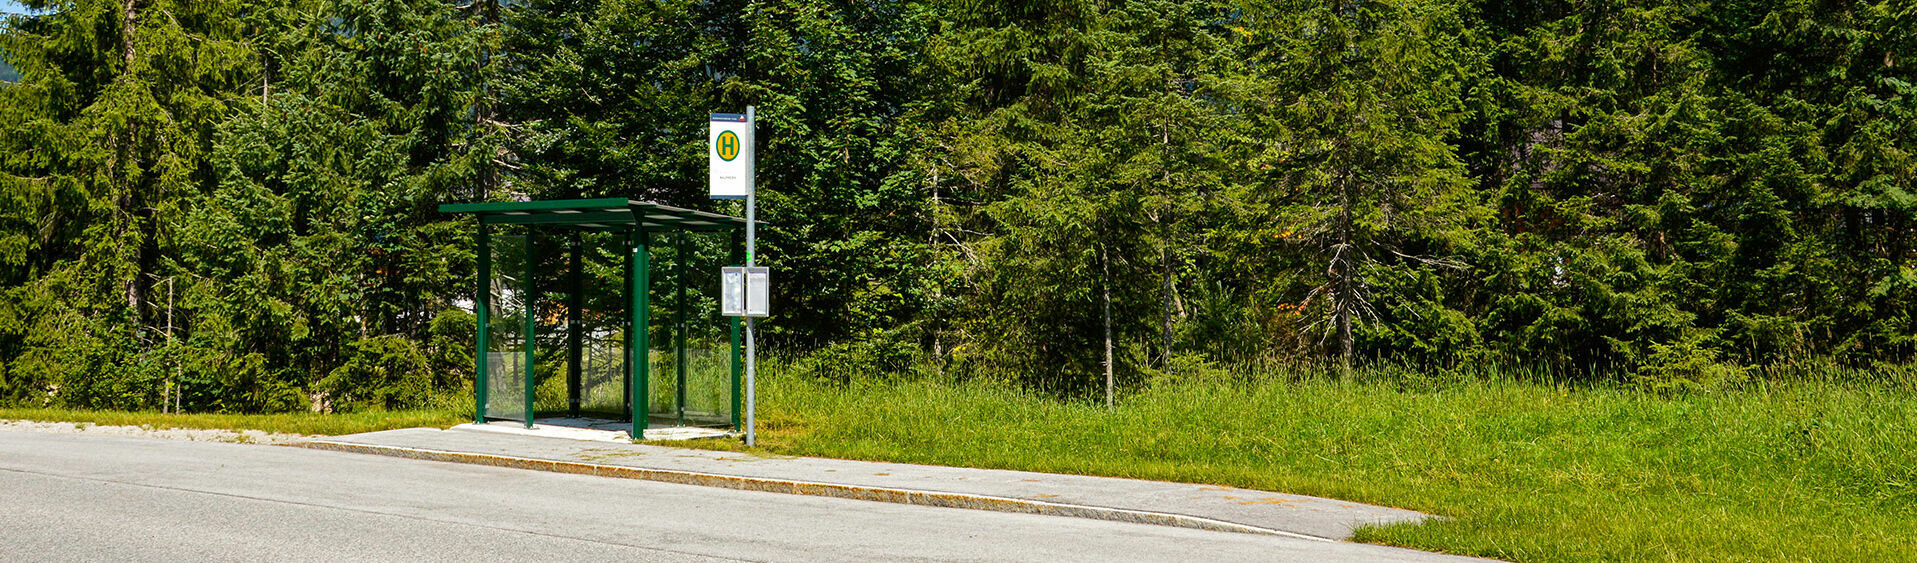 The AchenseeCard allows free use of the public buses which run at regular intervals between the villages of Achenkirch, Maurach, Pertisau, Steinberg, Wiesing and Jenbach. 